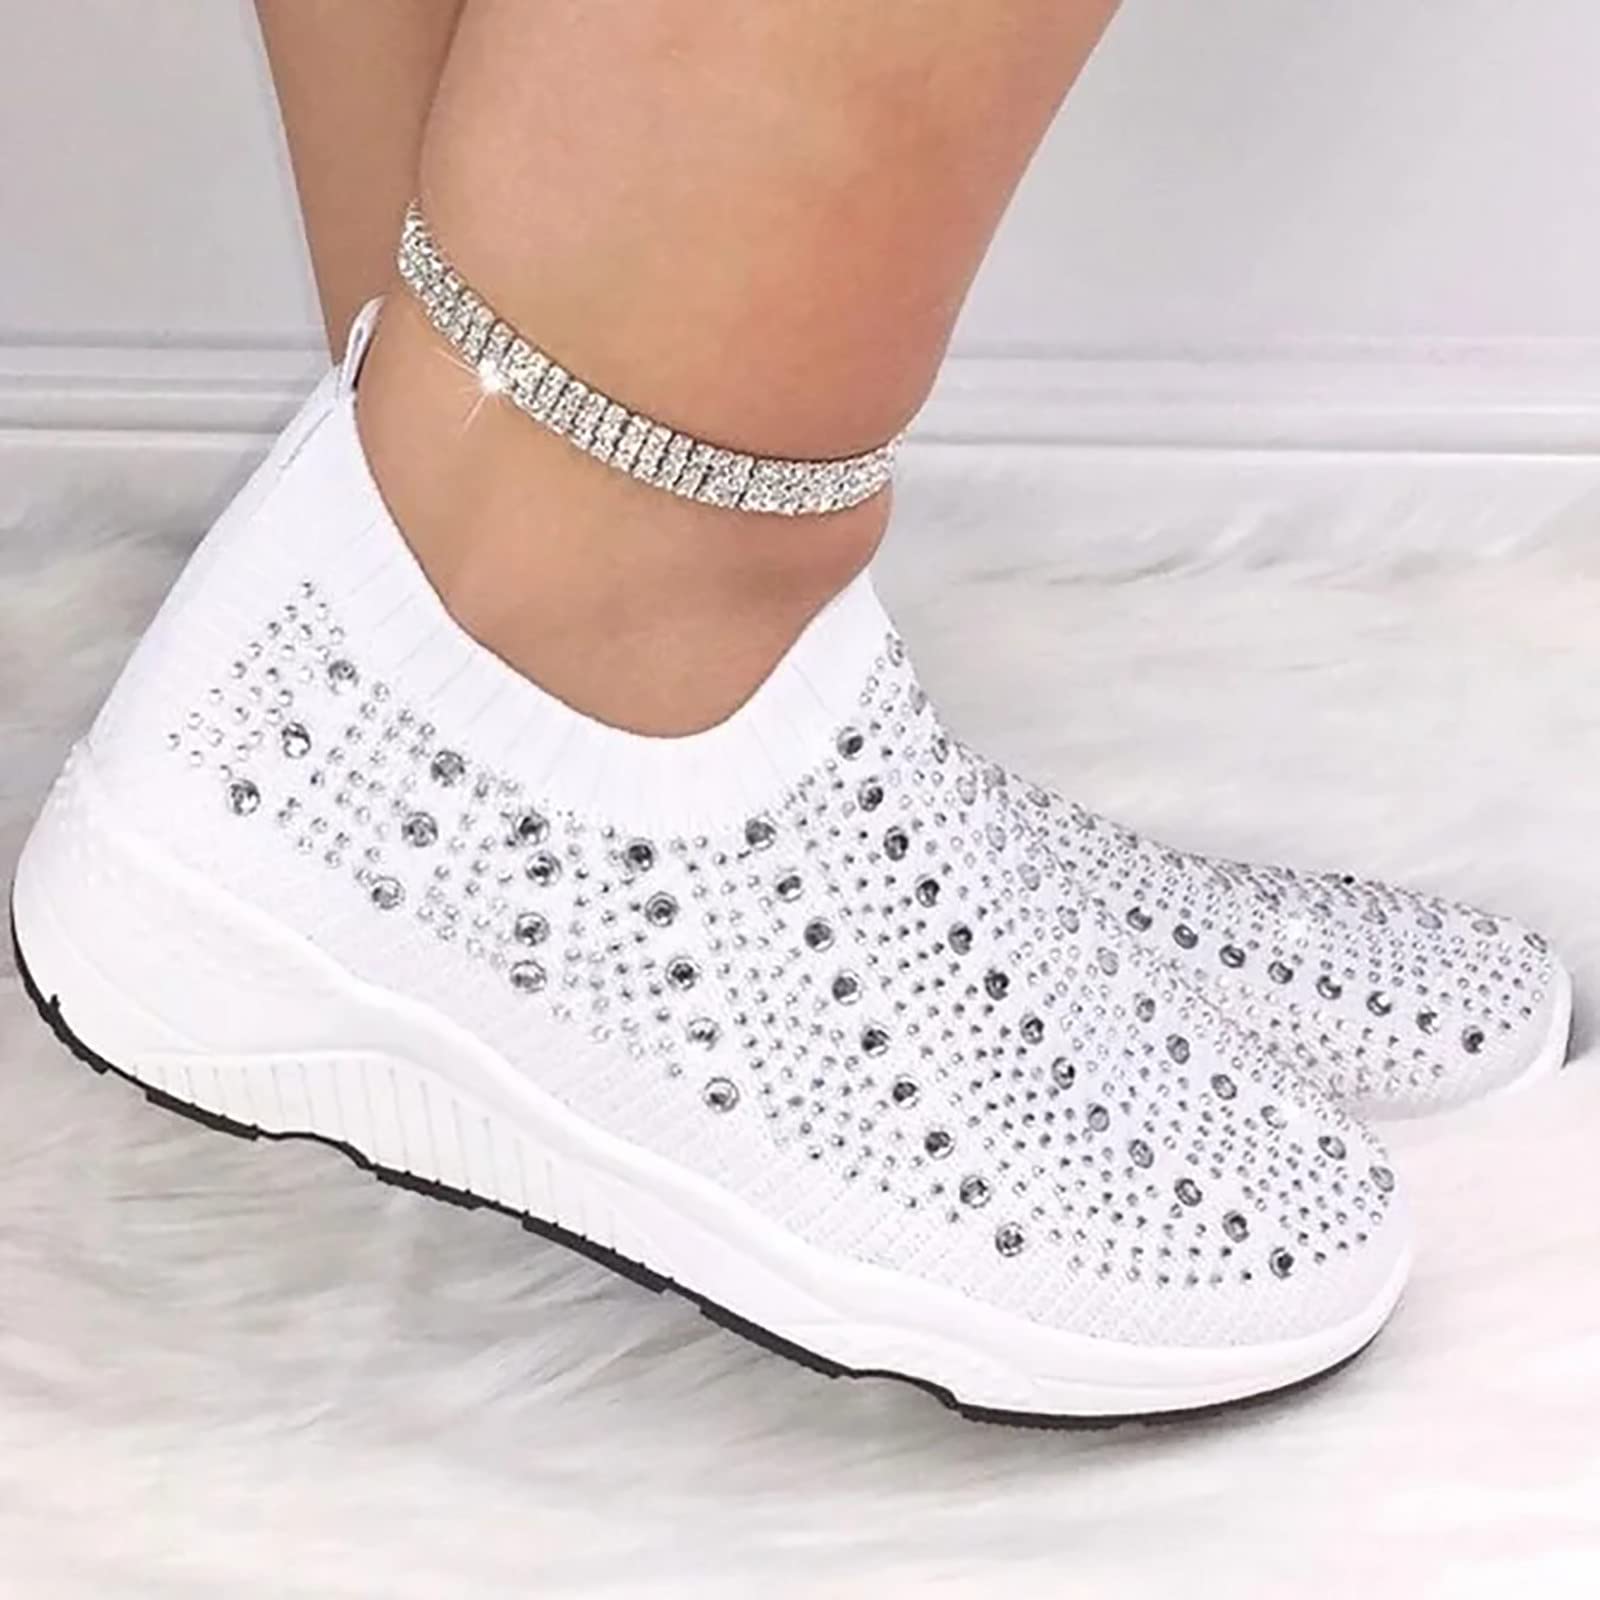 Today 2023 Orthopedic Sneakers Walking Shoes Womens Fashion Lace-Up Shoes Lightweight Tennis Shoes